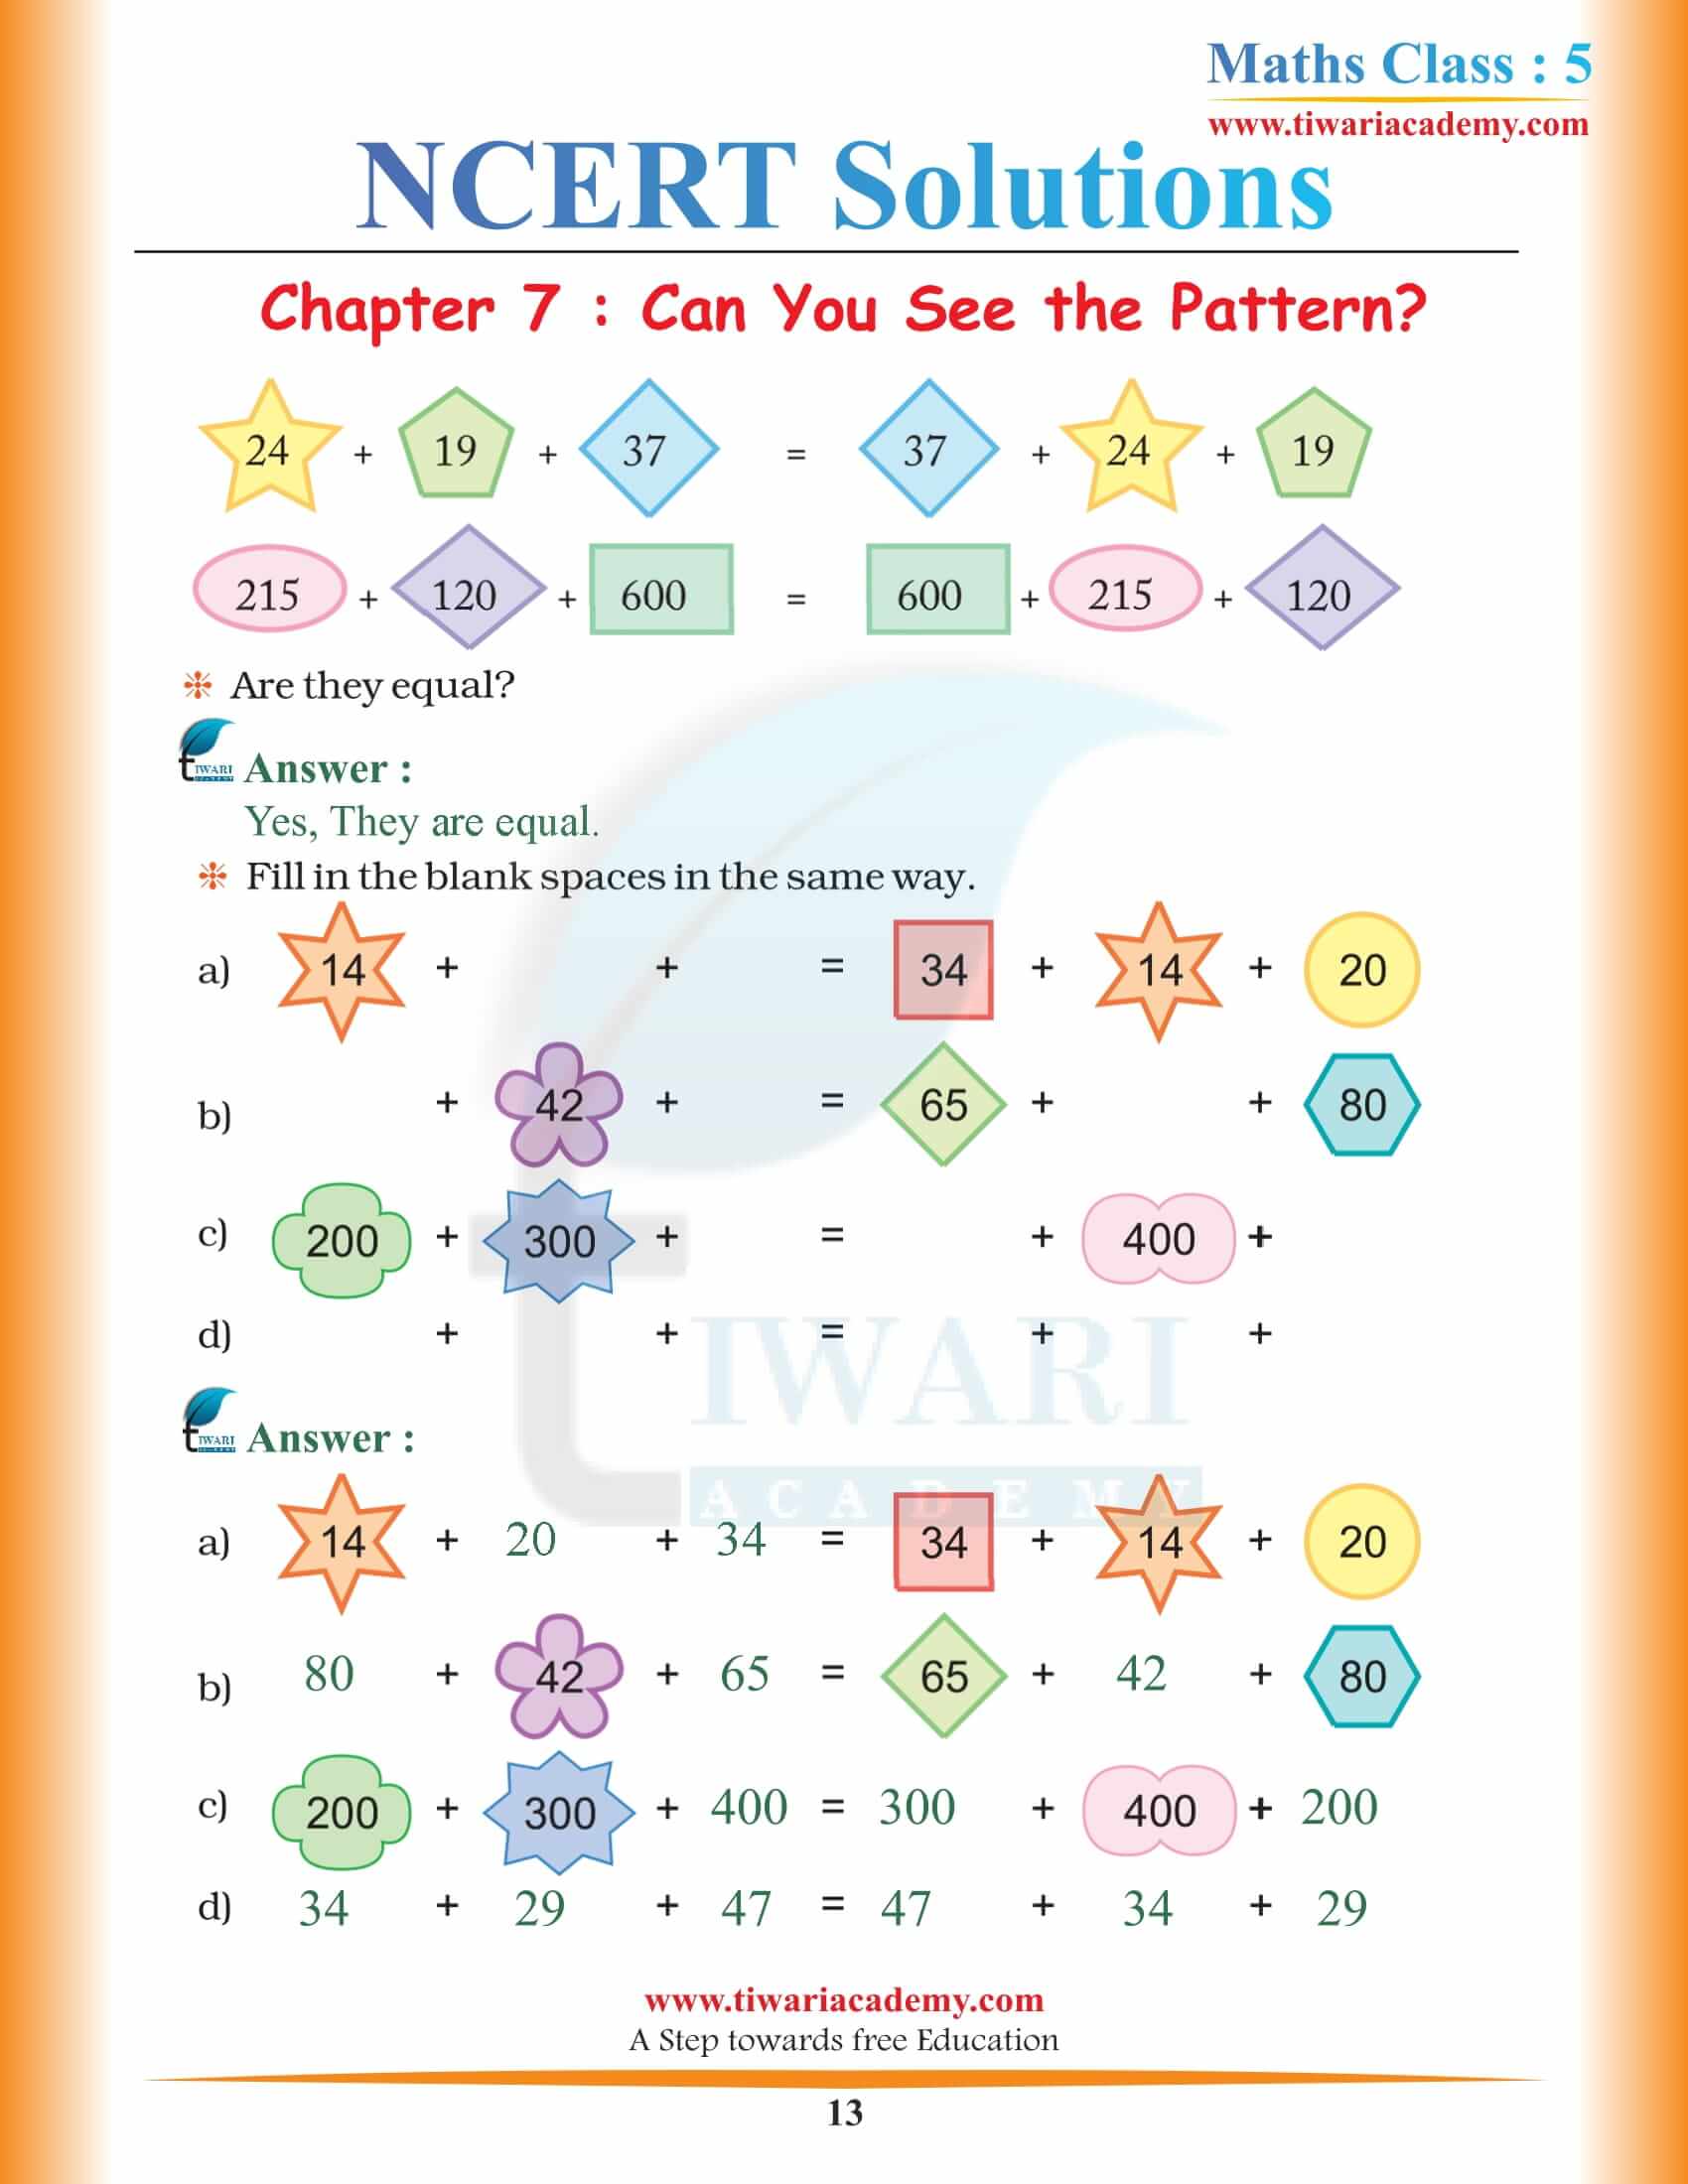 Class 5 Maths Chapter 7 NCERT Solutions in PDF